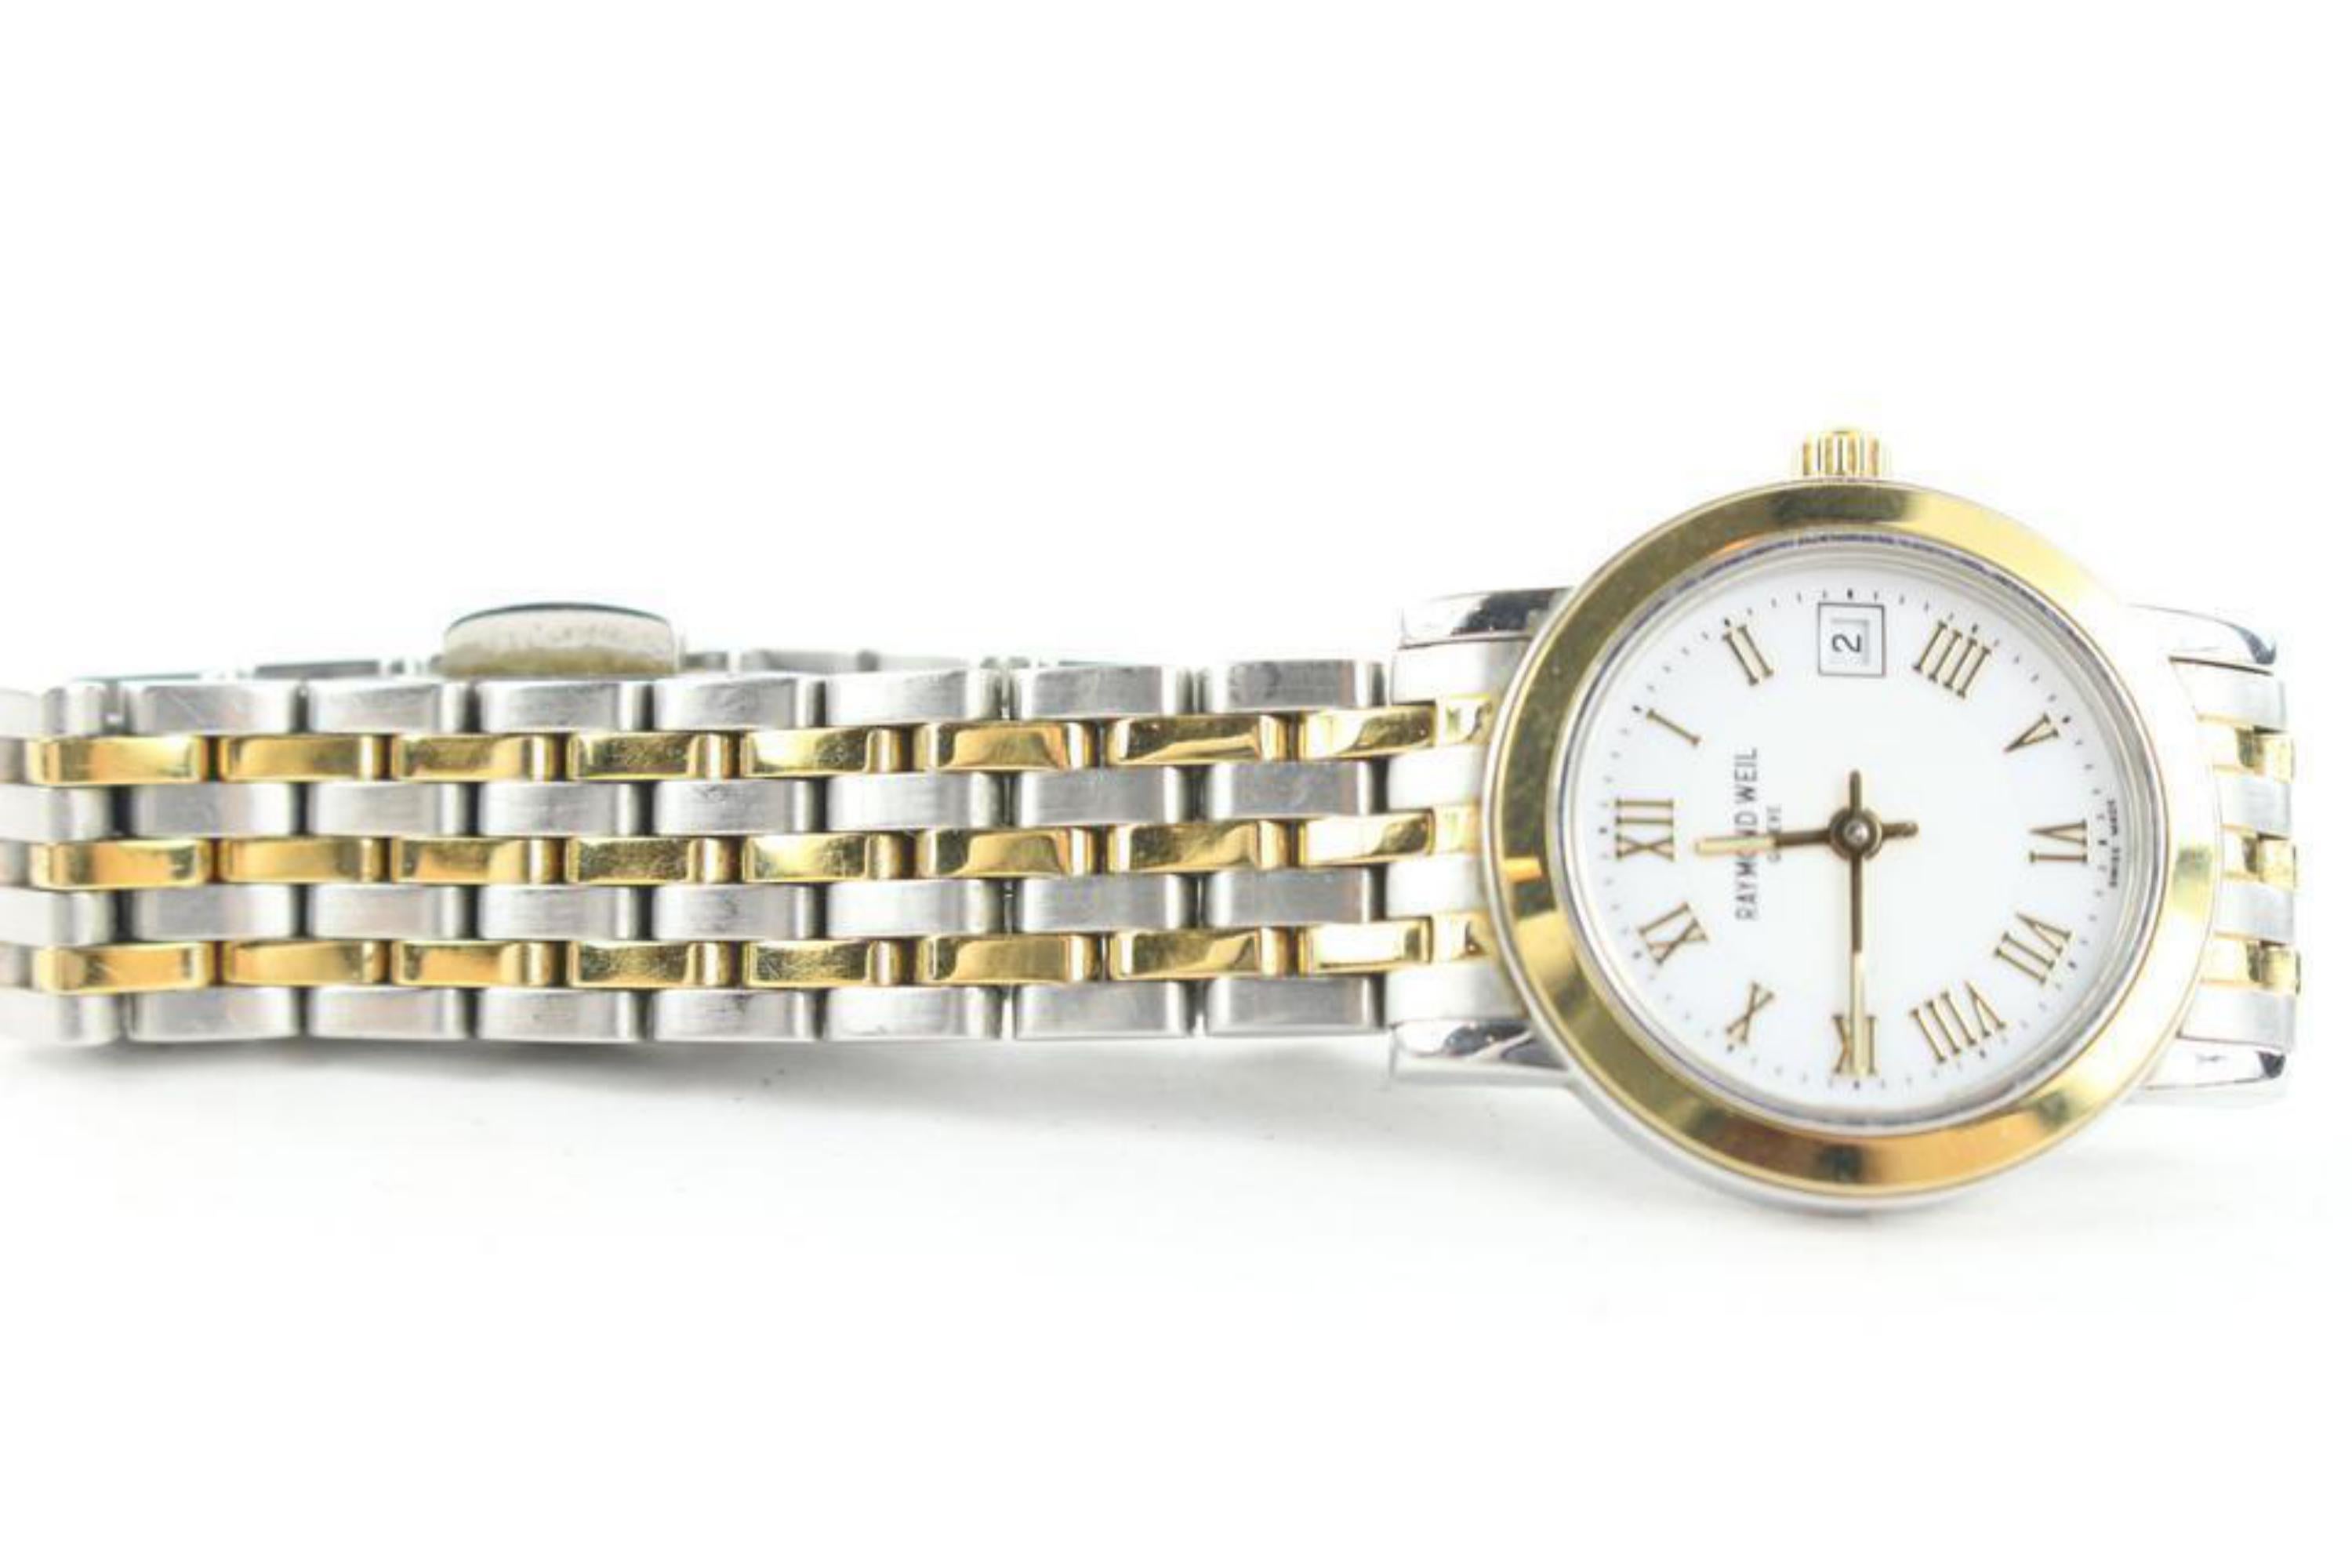 Raymond Weil 5393 Toccata Diamond Two-Tone Stainless Steel 35mm Watch 1RW1227
Date Code/Serial Number: 5393 V335088
Made In: Swiss Made
Measurements: Length:  3.5